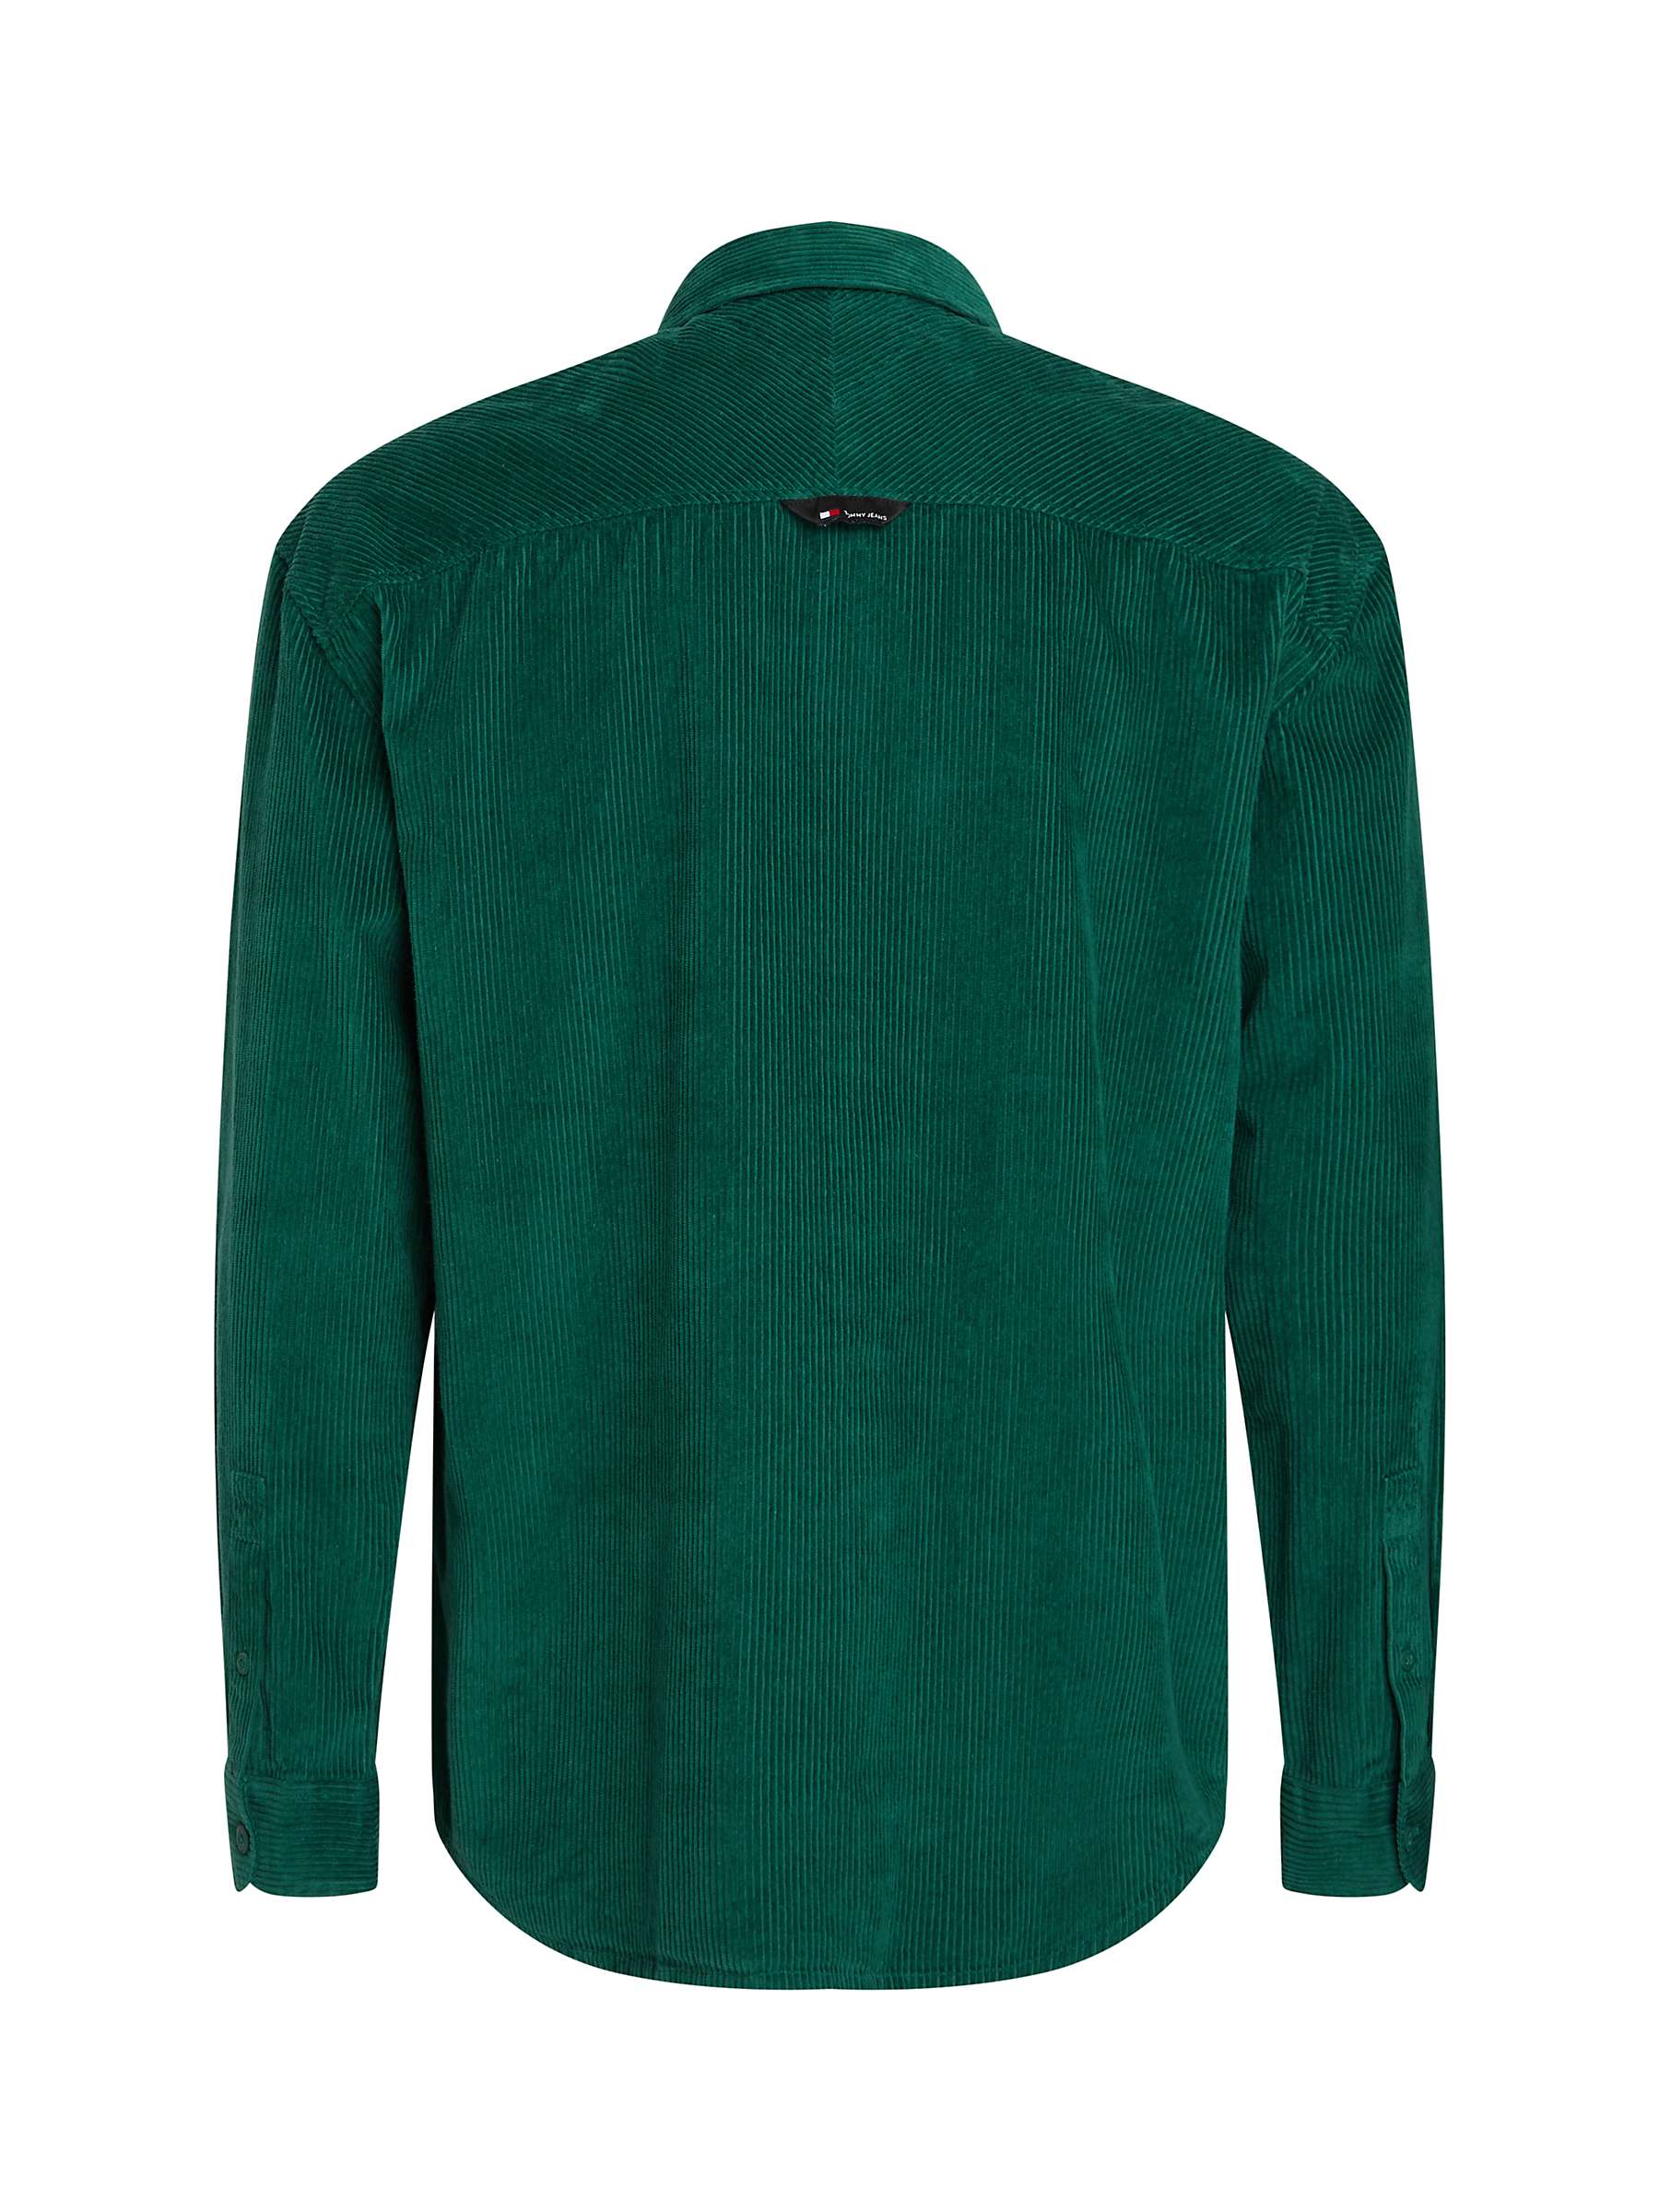 Buy Tommy Jeans Relaxed Corduroy Long Sleeve Shirt Online at johnlewis.com